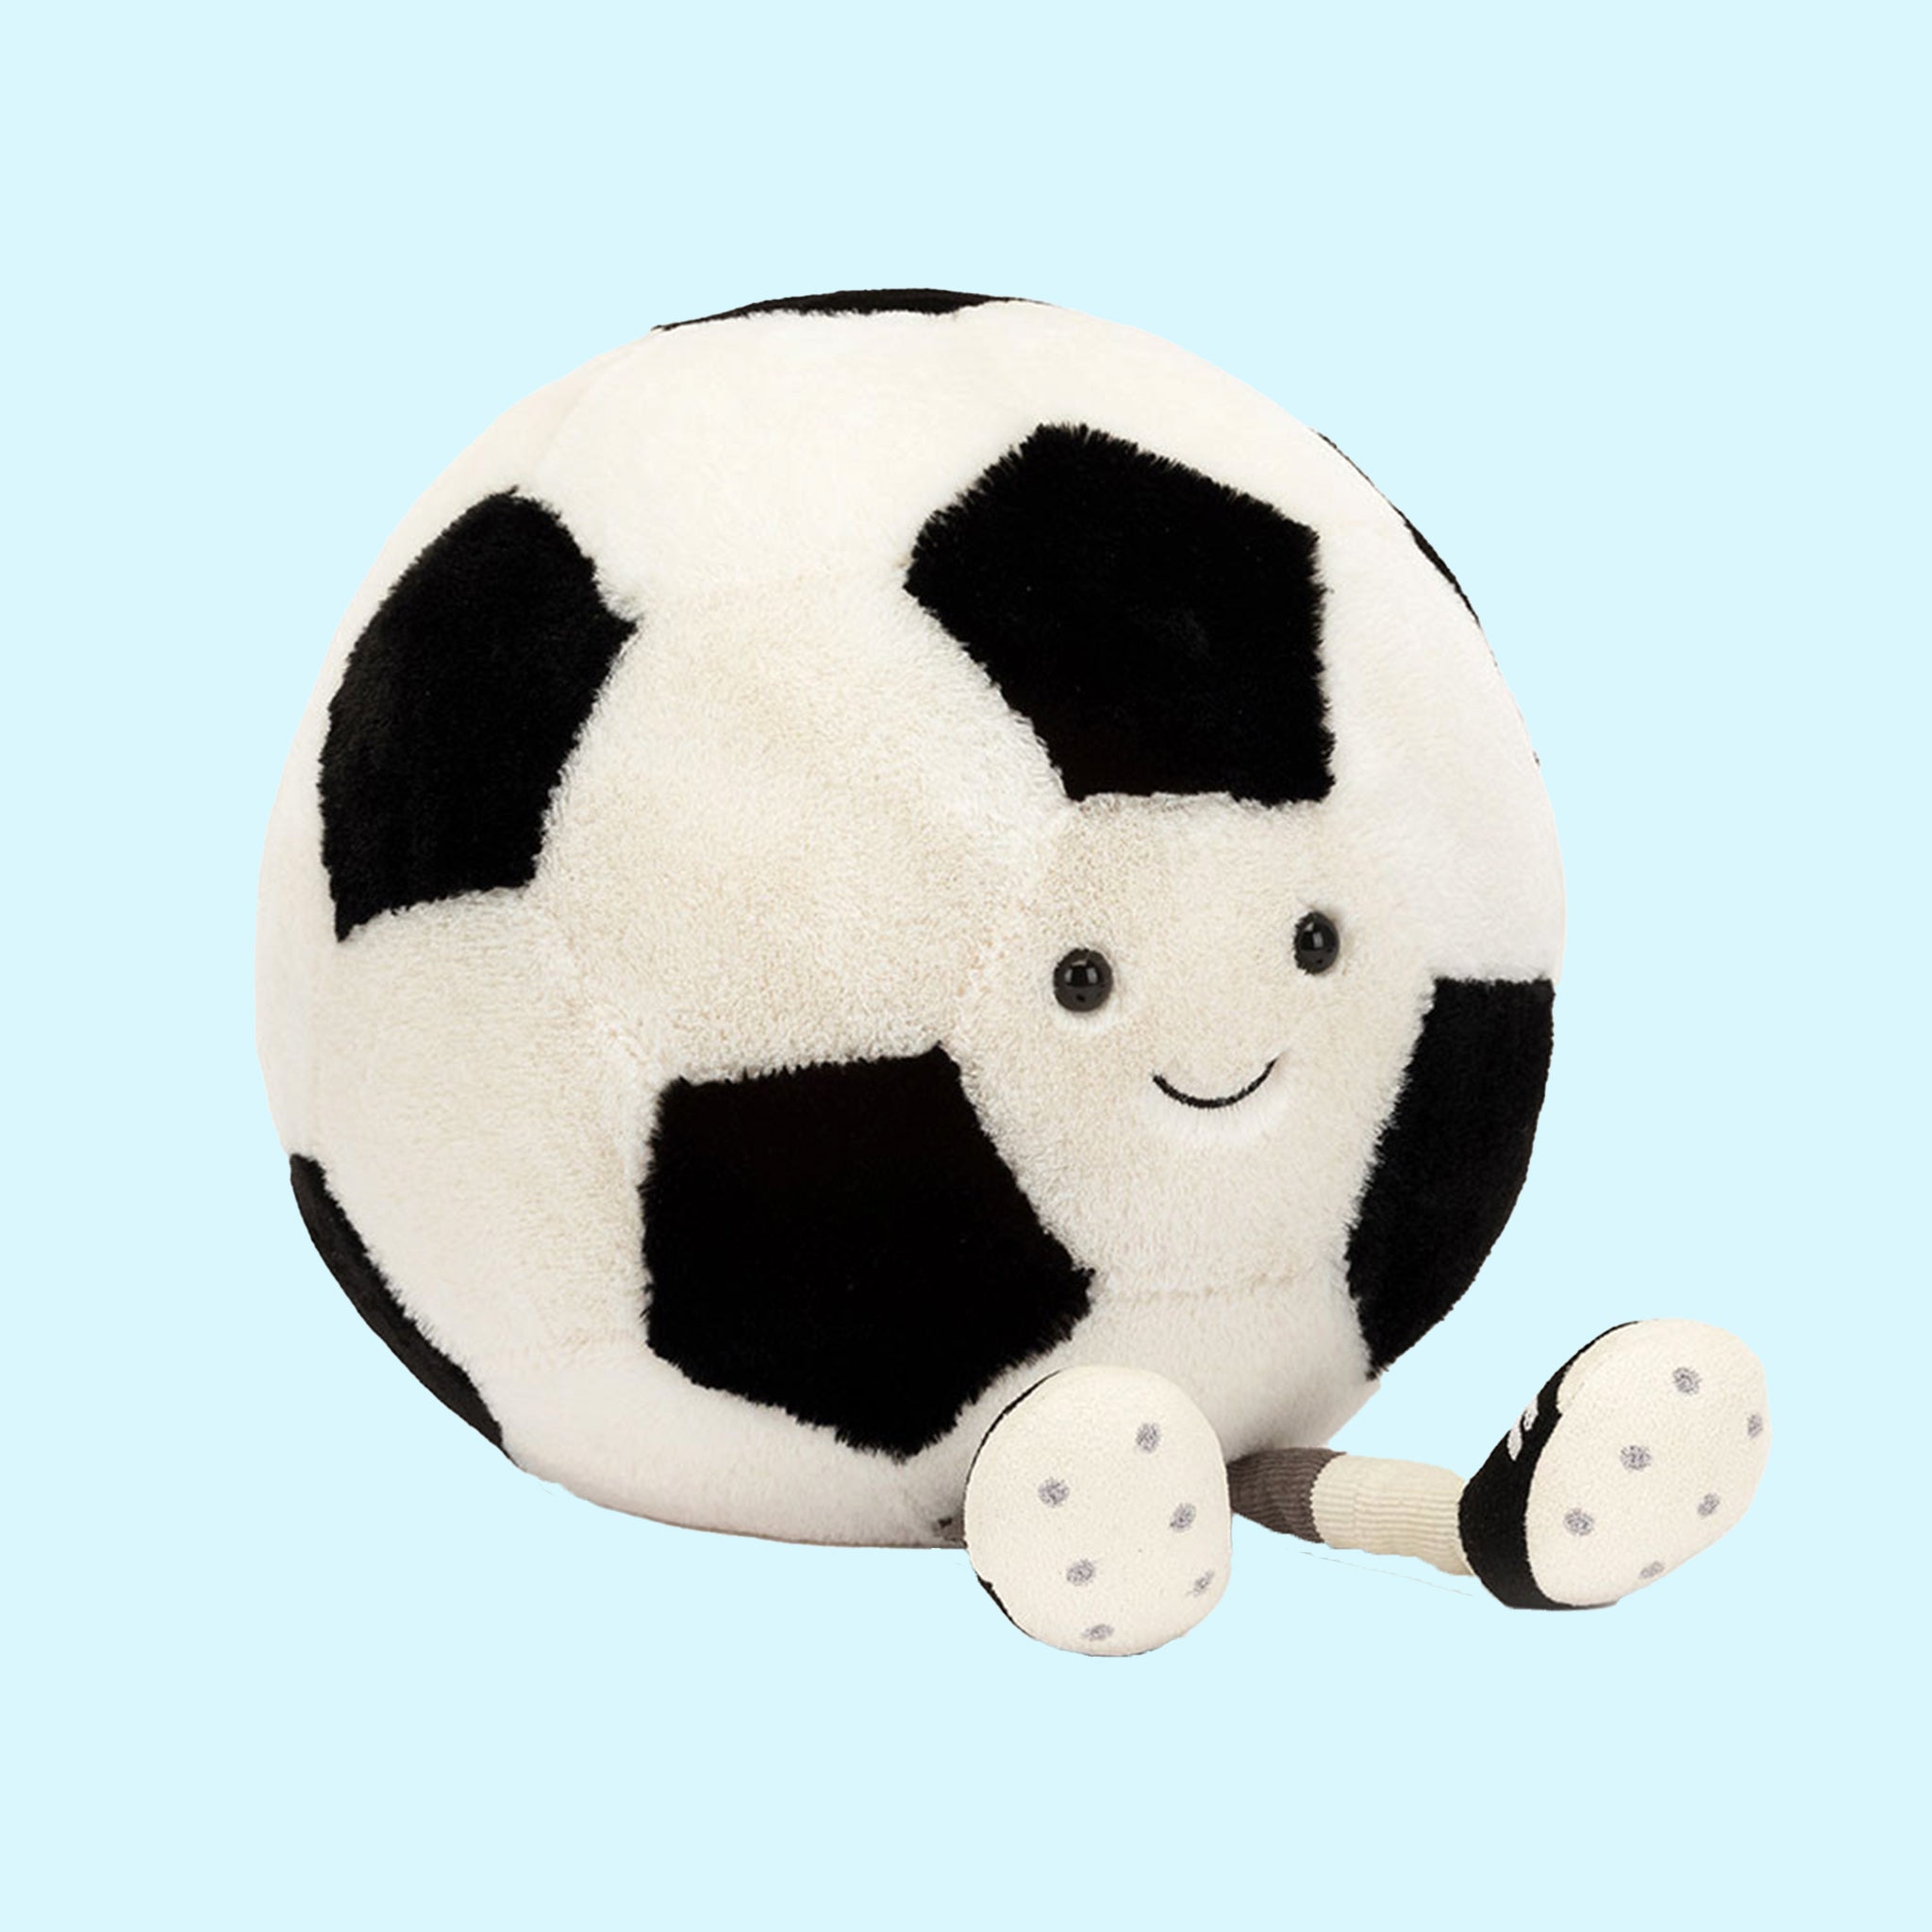 On a blue background is a black and white soccer ball stuffed toy. 